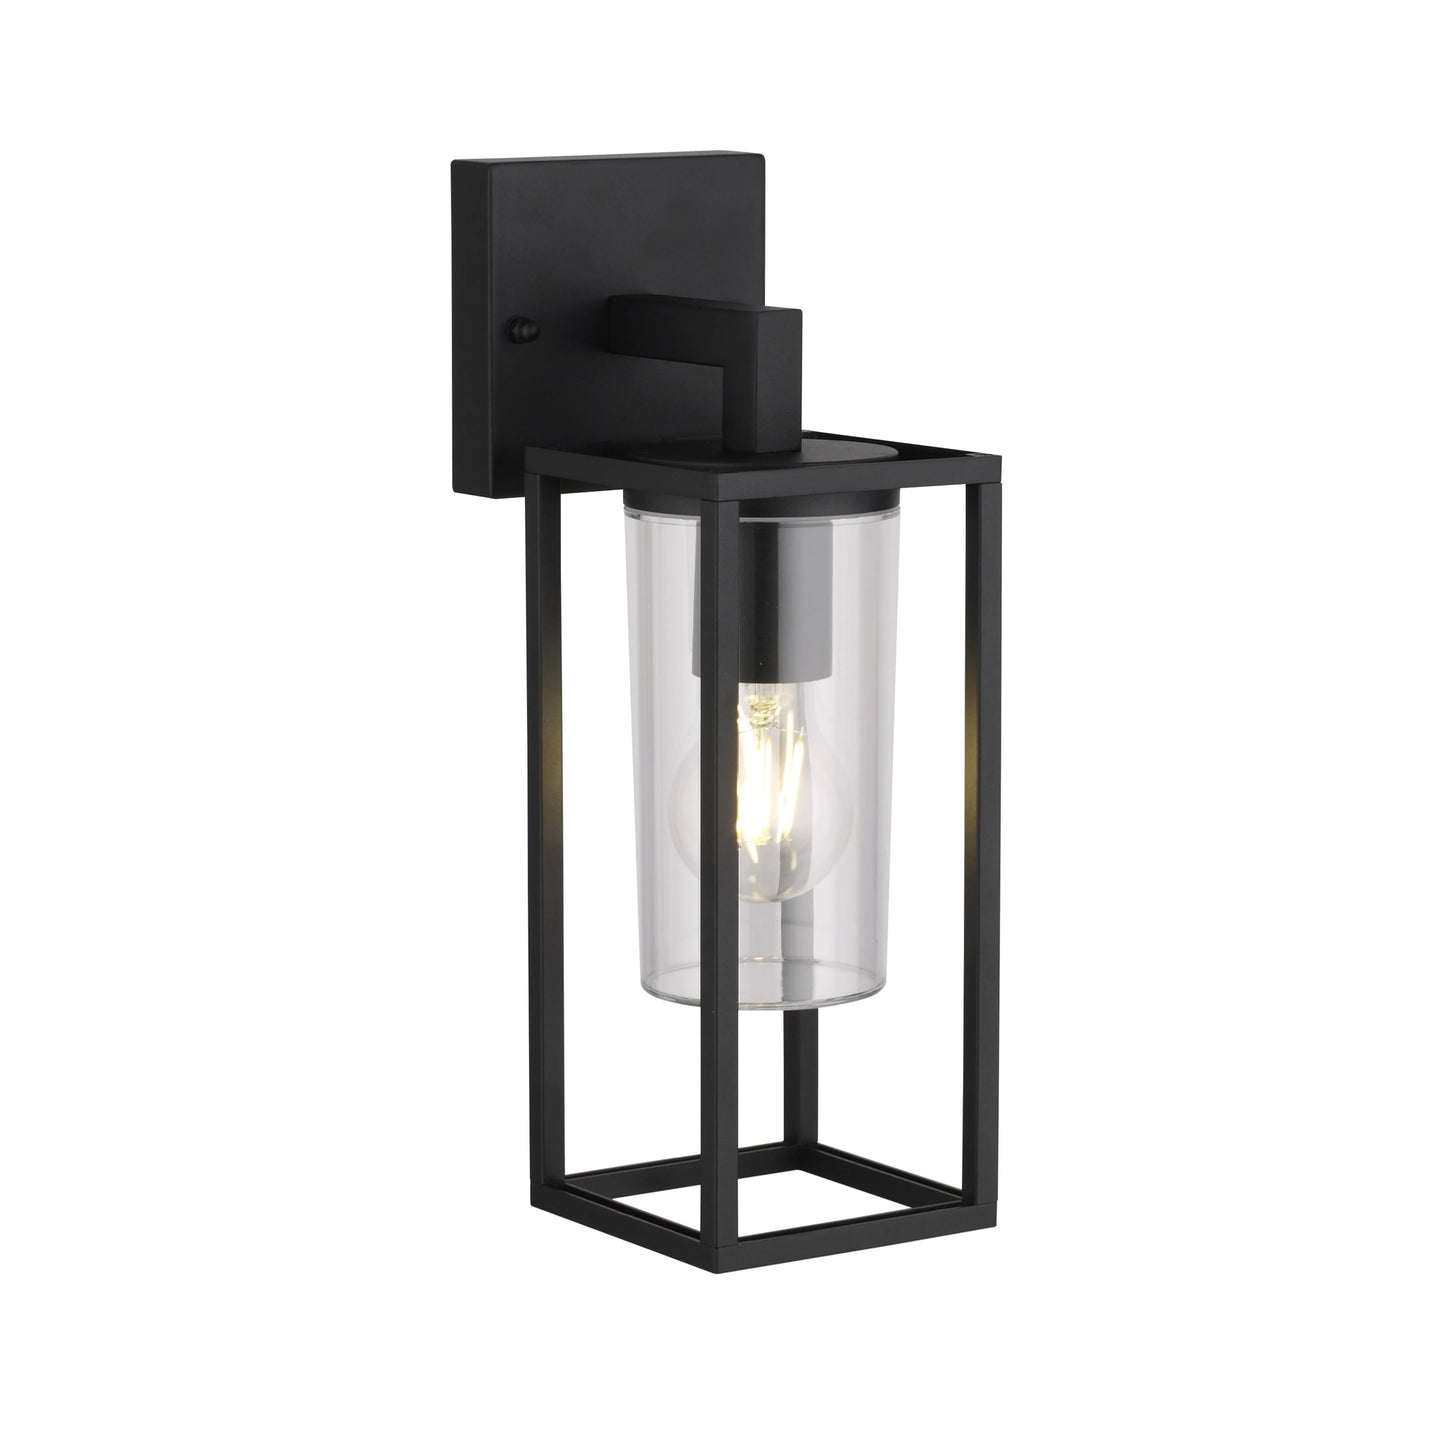 If you’re looking for a modern take on a traditional outdoor wall light, this black lantern  wall light with clear diffuser is perfect for adding style and protection for your home. This classic design with a contemporary twist, styled with a metal lantern shape and fitted with a cylinder diffuser that allows the light to shine effectively. 